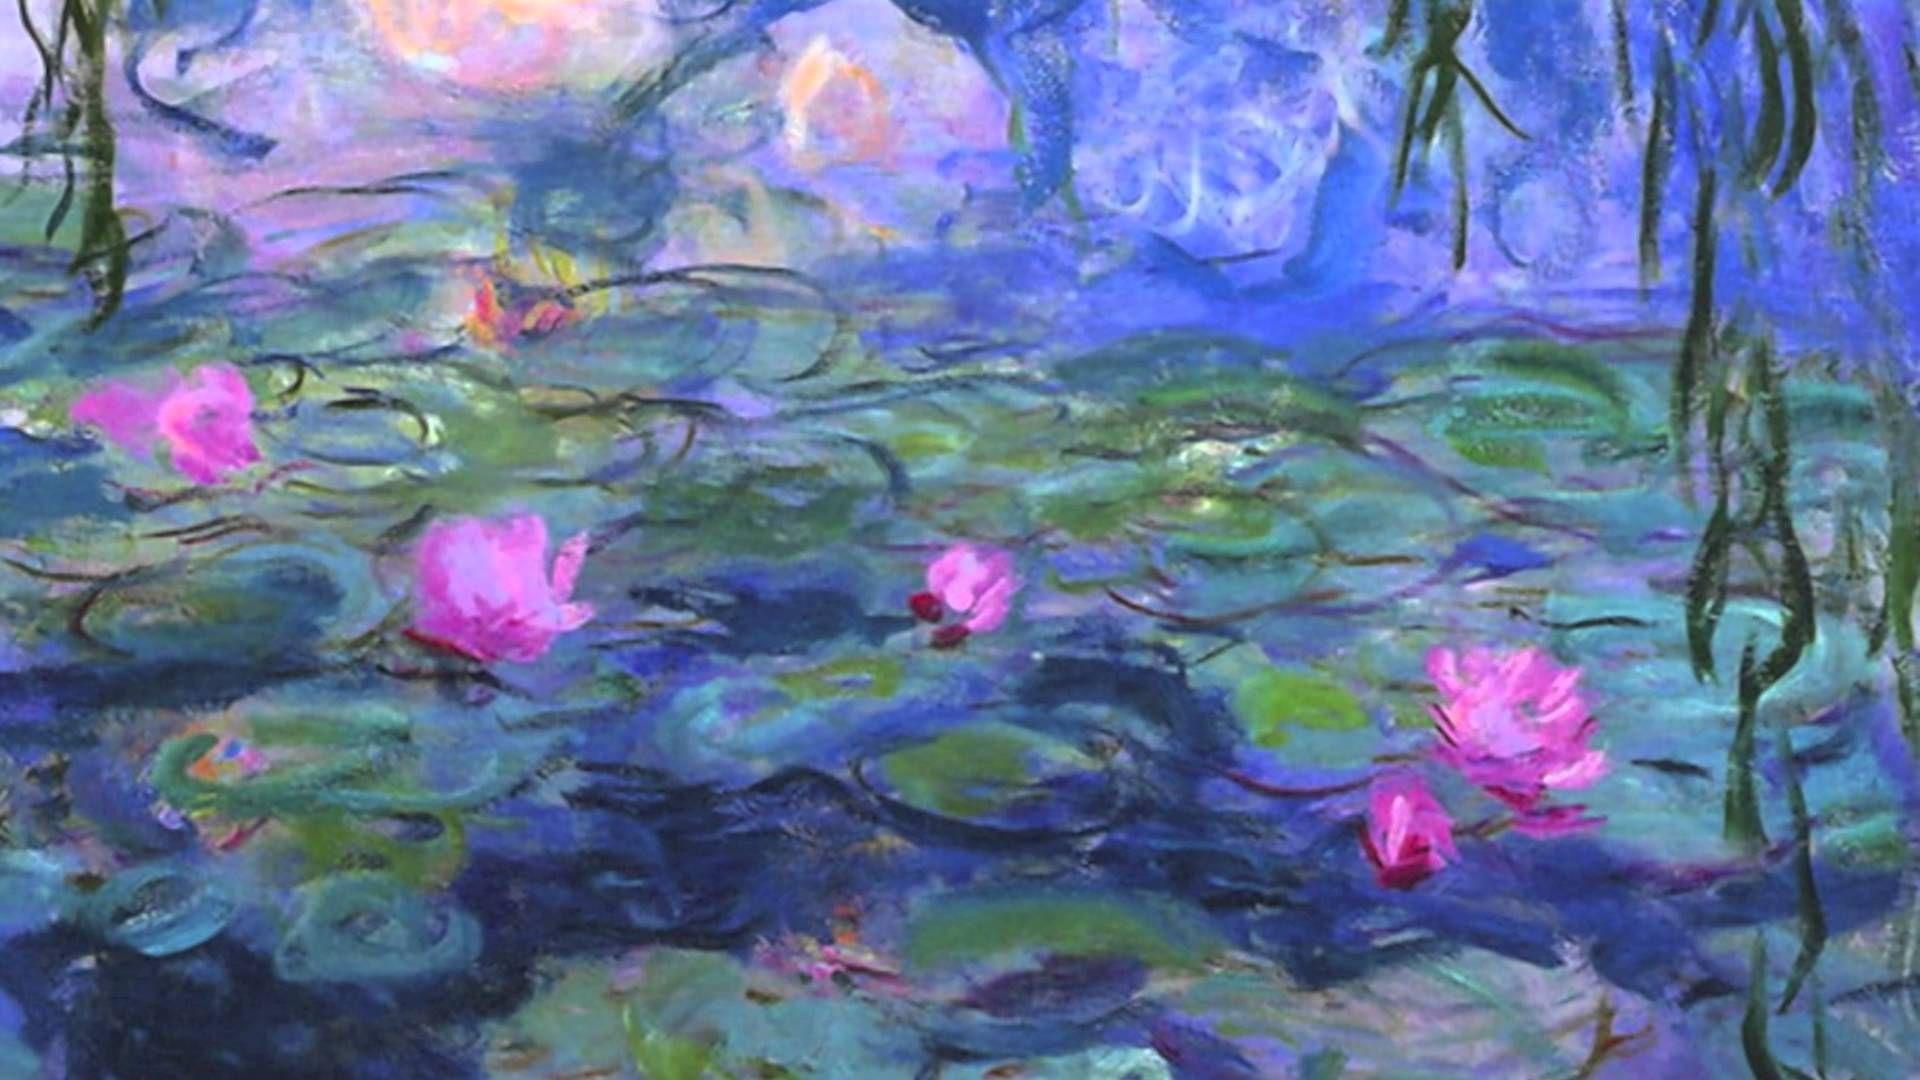 Claude Monet  The WaterLily Pond  NG4240  National Gallery London